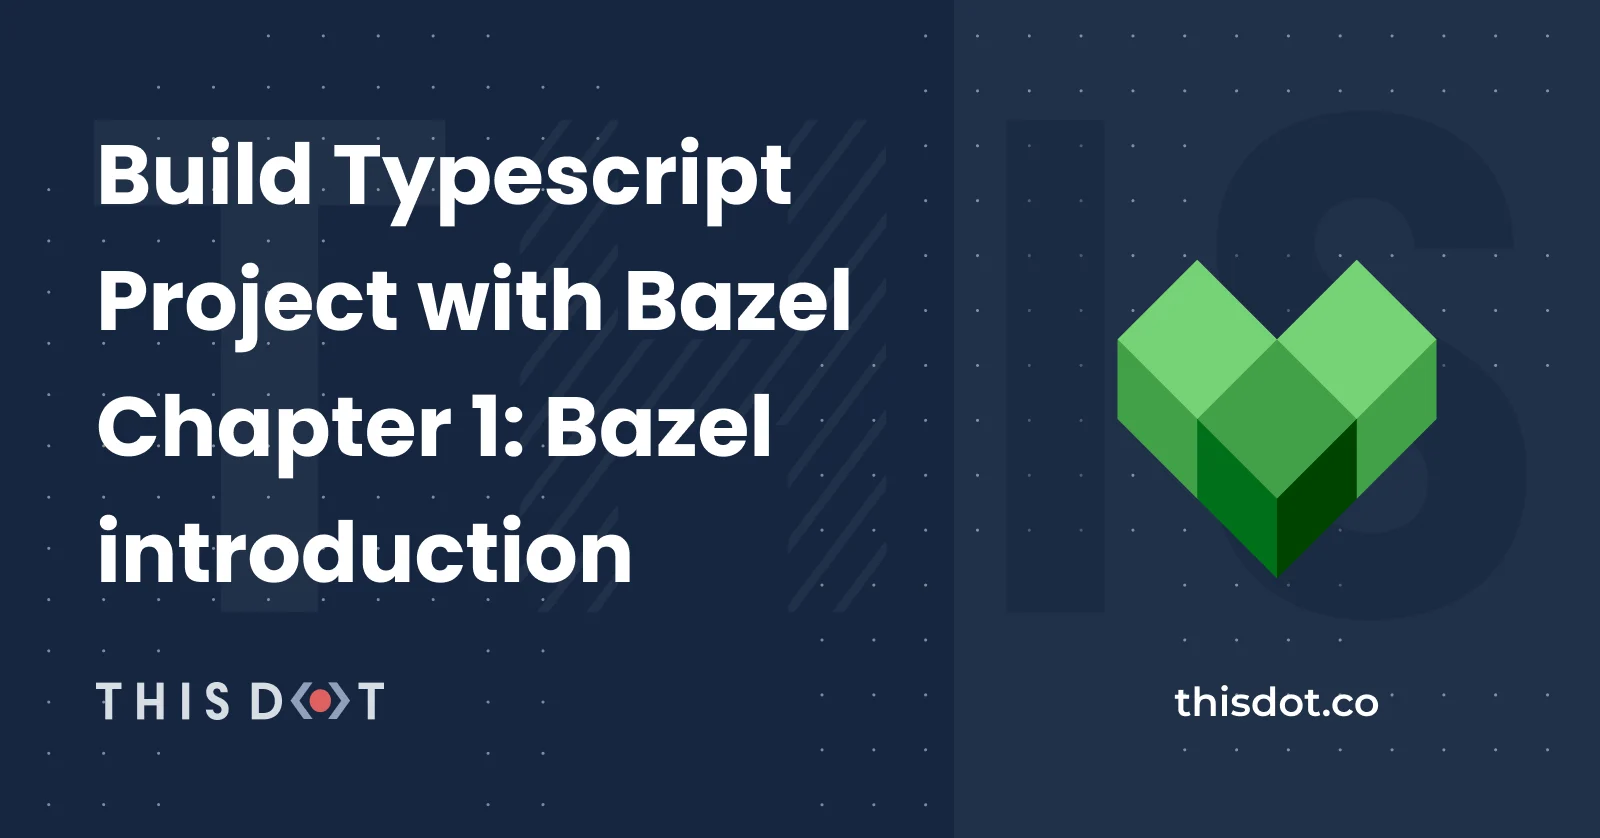 Build Typescript Project with Bazel Chapter 1: Bazel introduction cover image